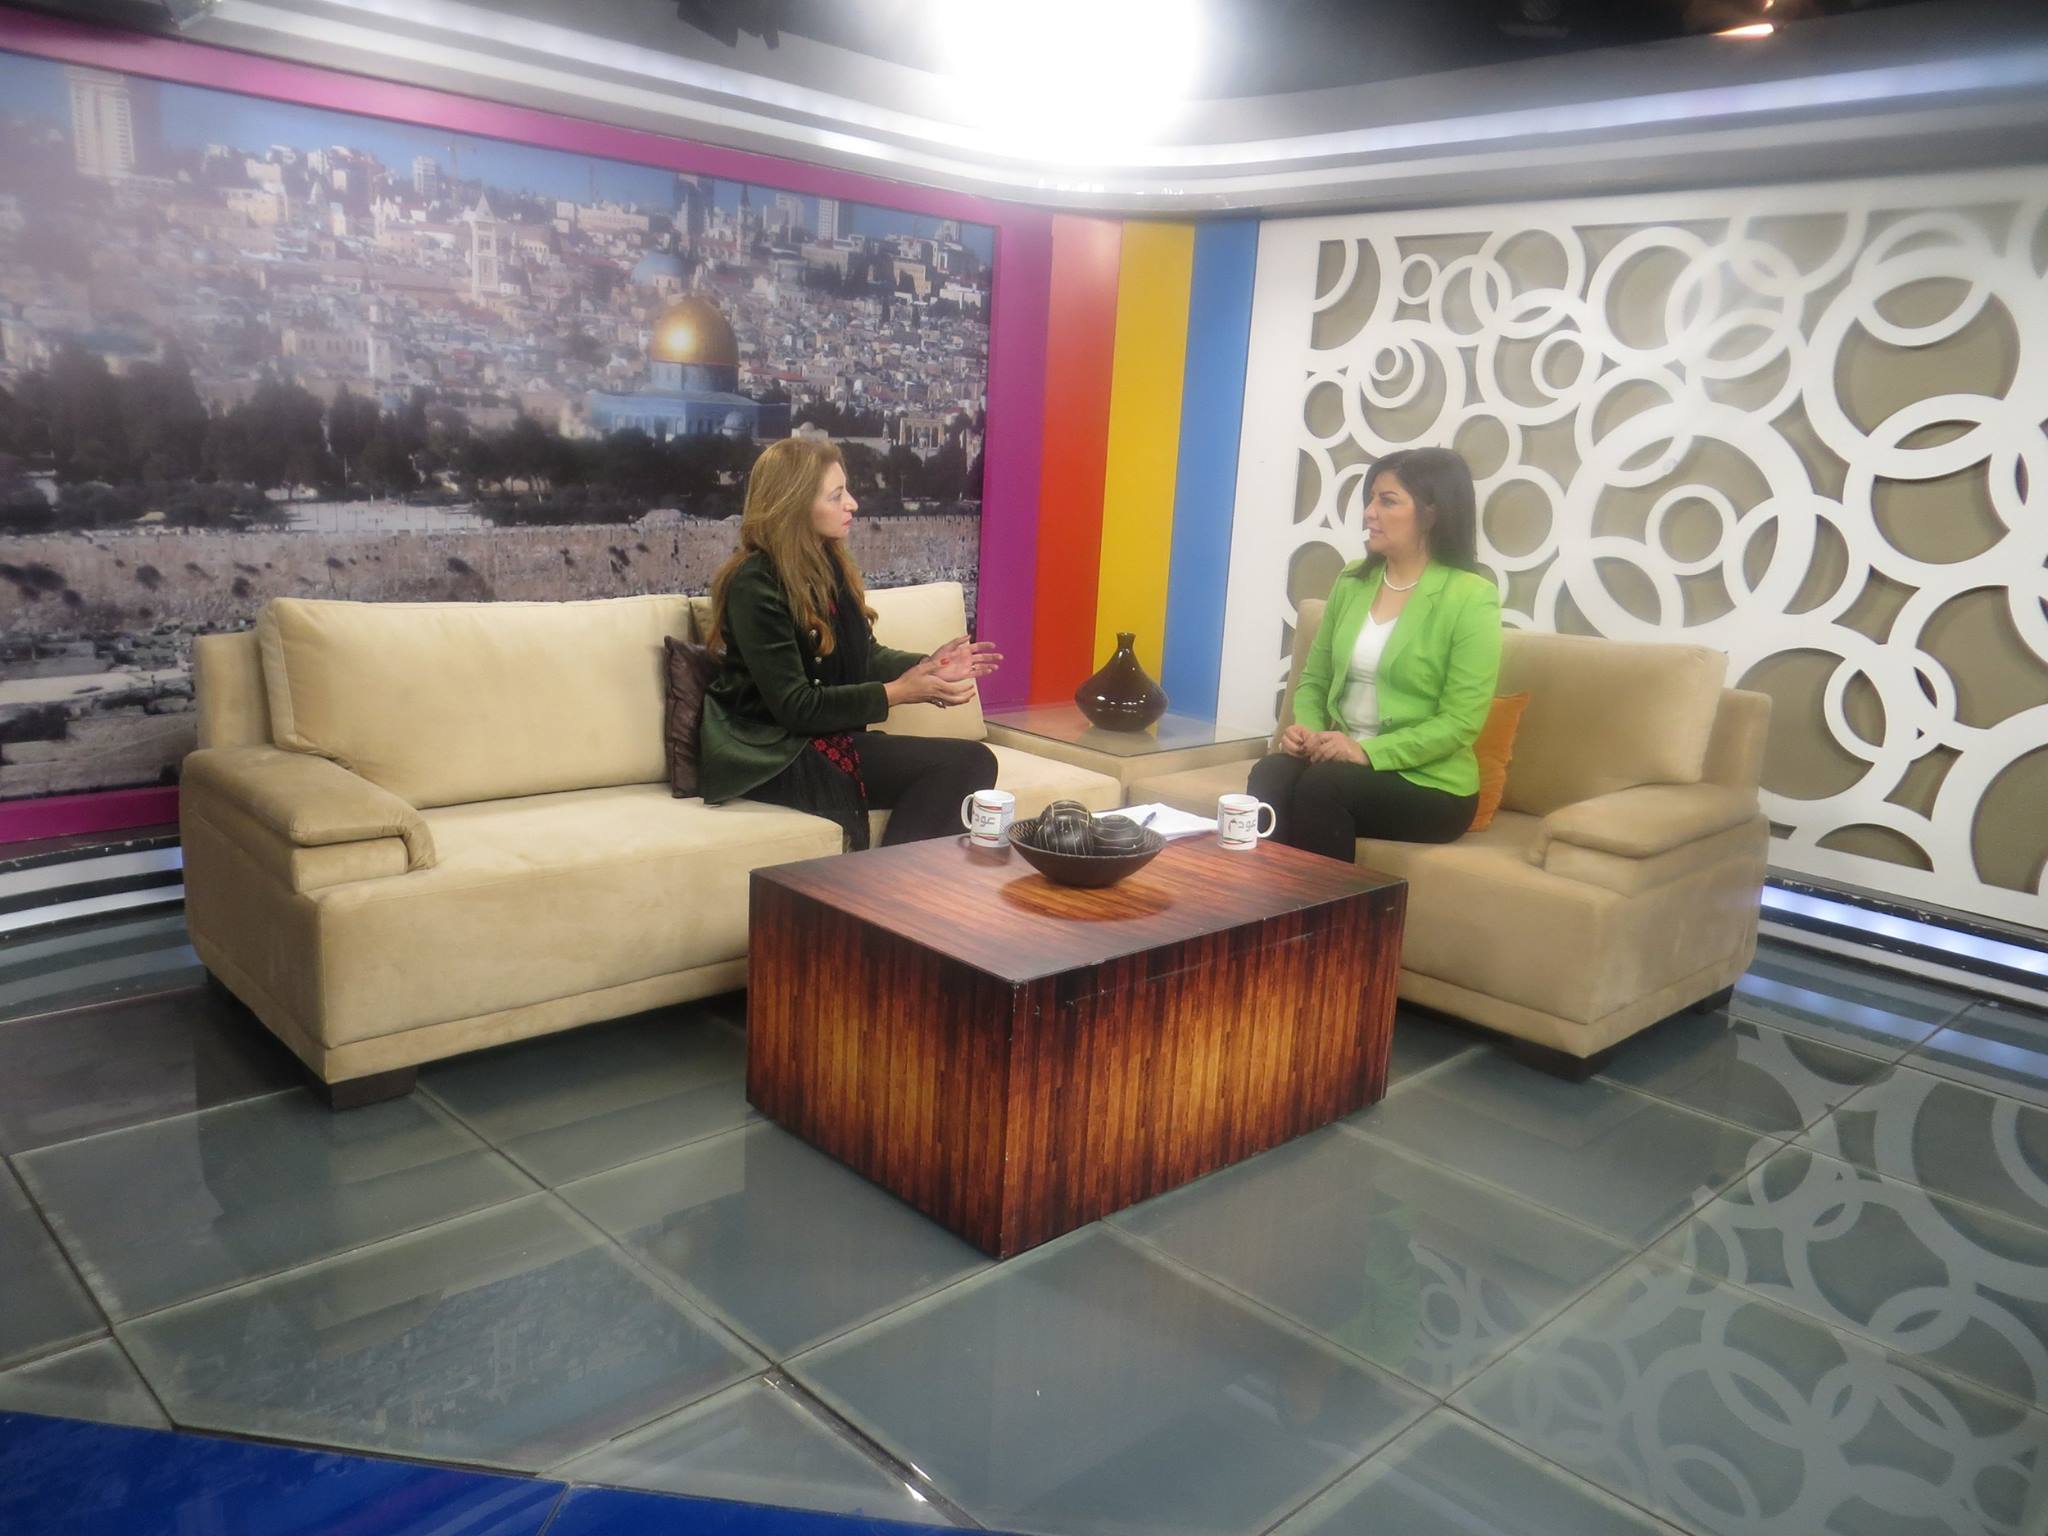  ADWAR, represented by the general director of ADWAR, Sahar Alkawasmeh, participated in a recorded episode of “Sabbah Mawtini”